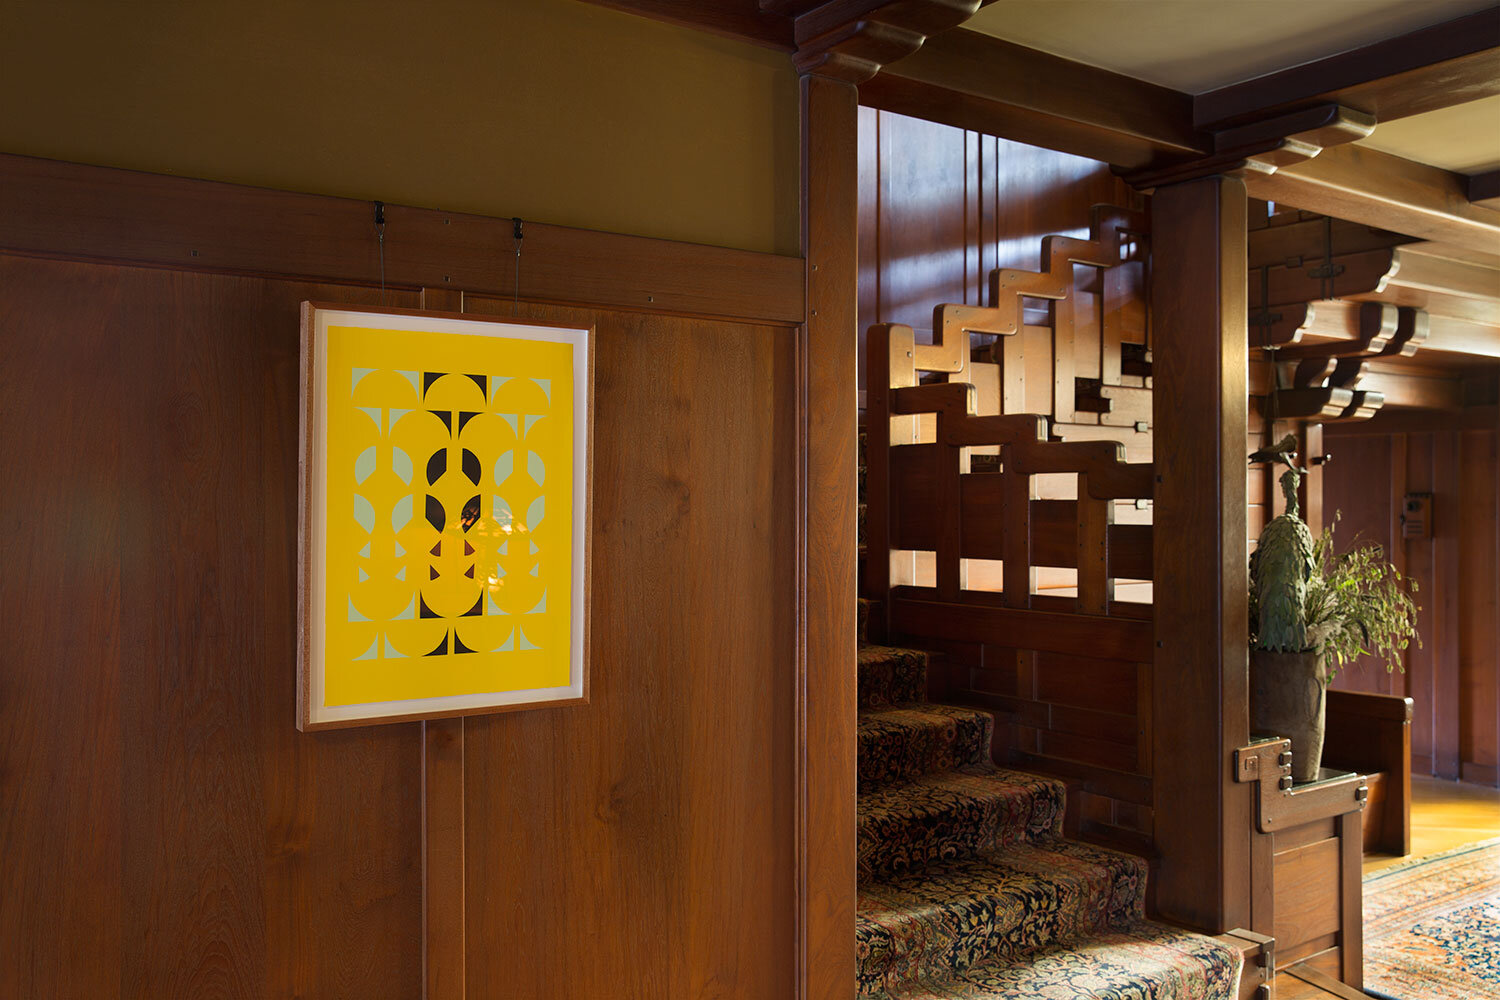 Group Exhibition: Machine Project Field Guide to the Gamble House, 2015